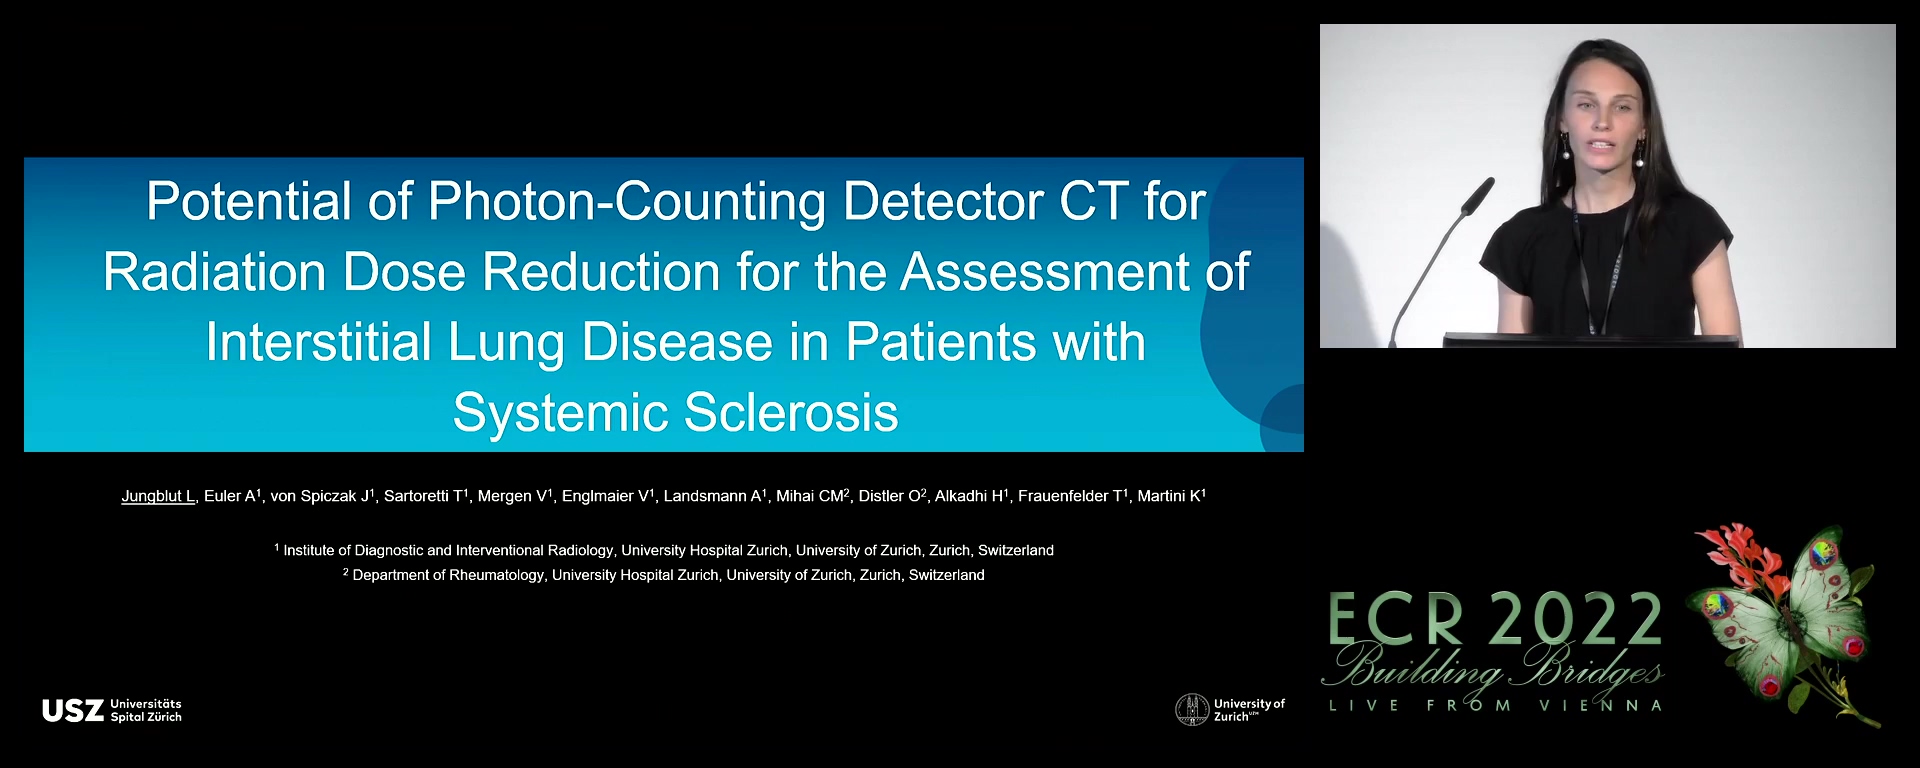 Potential of photon-counting detector CT for radiation dose reduction in the assessment of interstitial lung disease in patients with scleroderma compared to energy-integrated detector CT - Lisa Jungblut, Zürich / CH